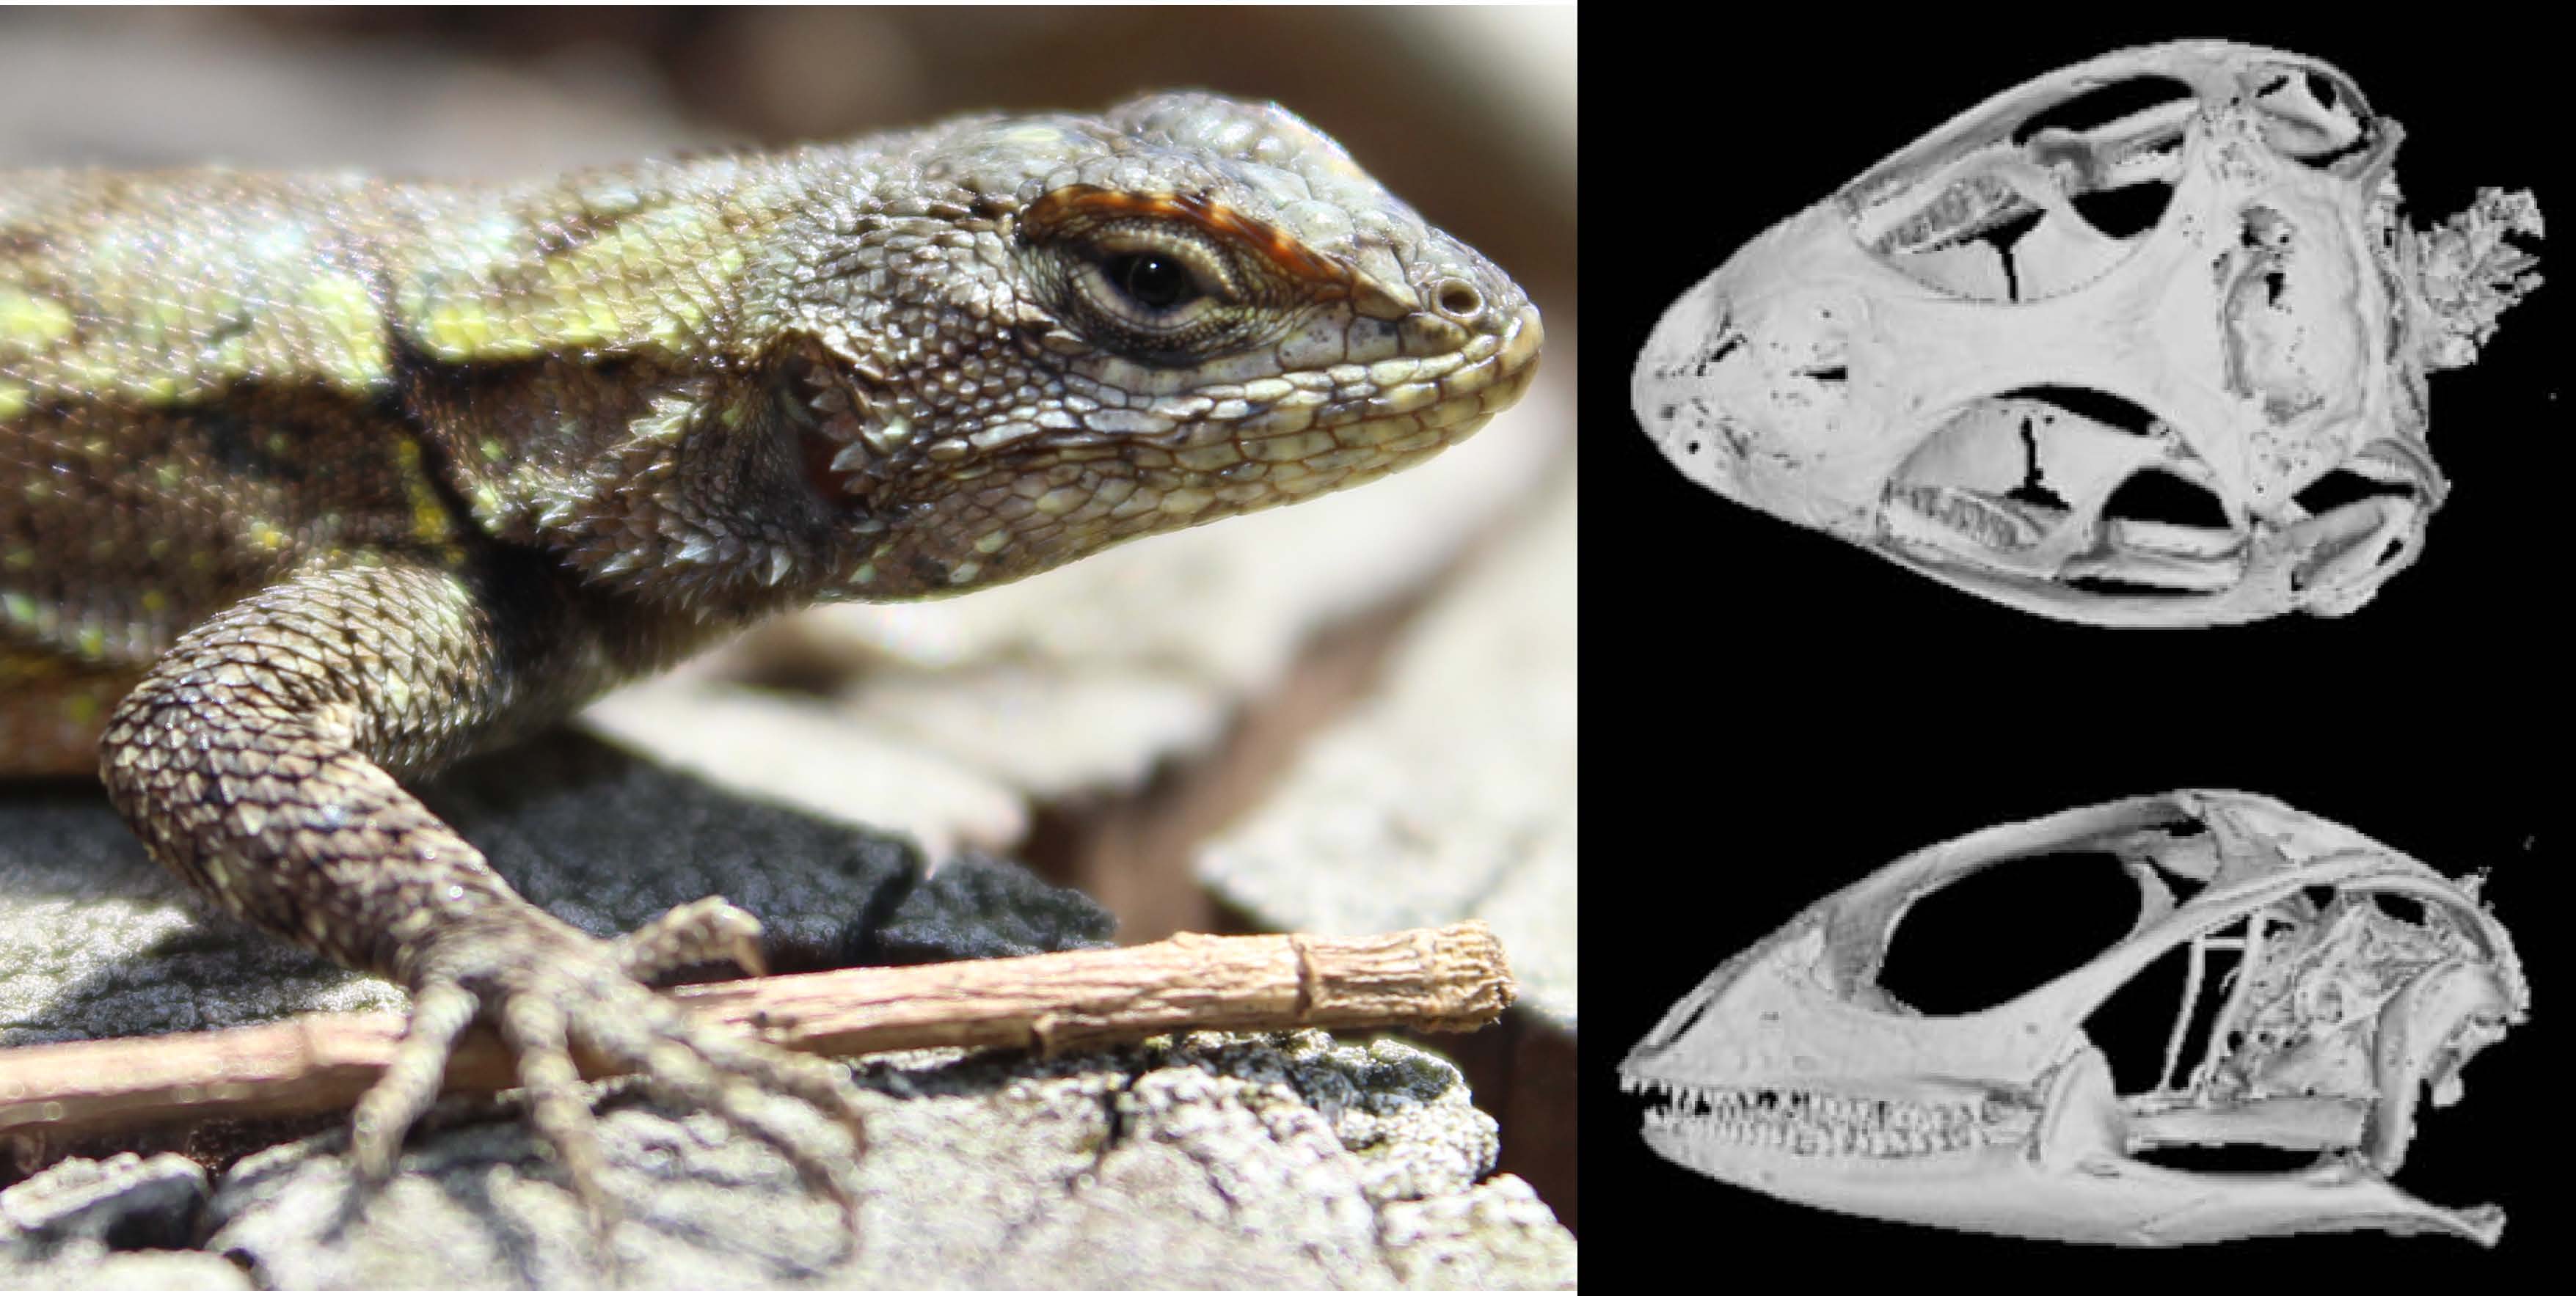 Image of Lizard and CT scans of Lizard skull